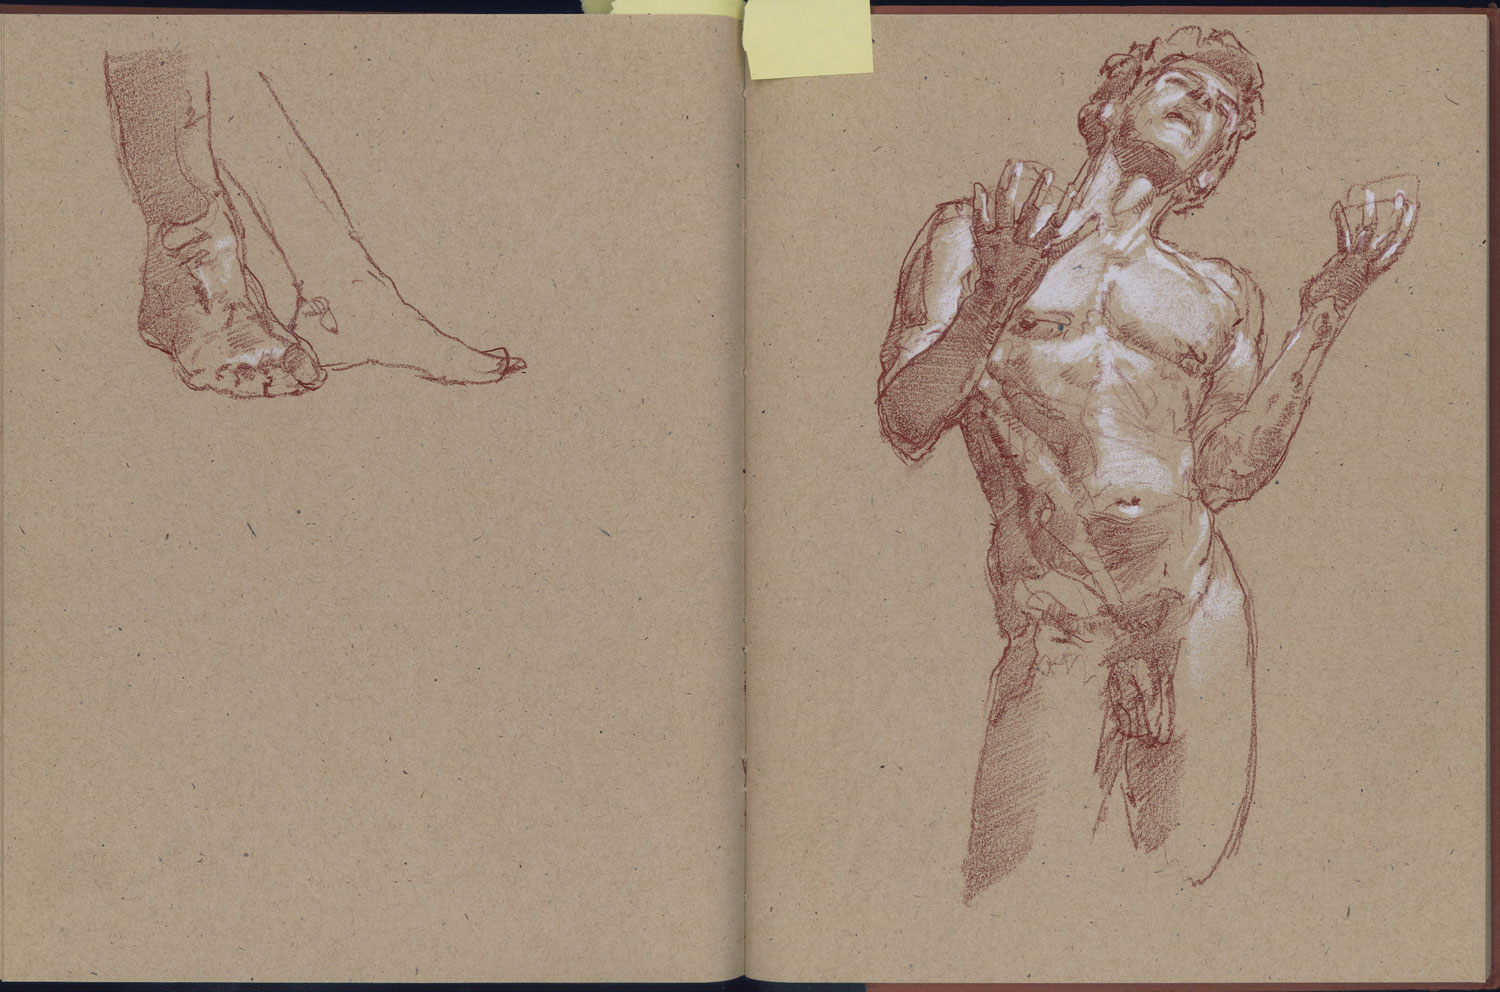 Life drawing session held by the London Atelier of 